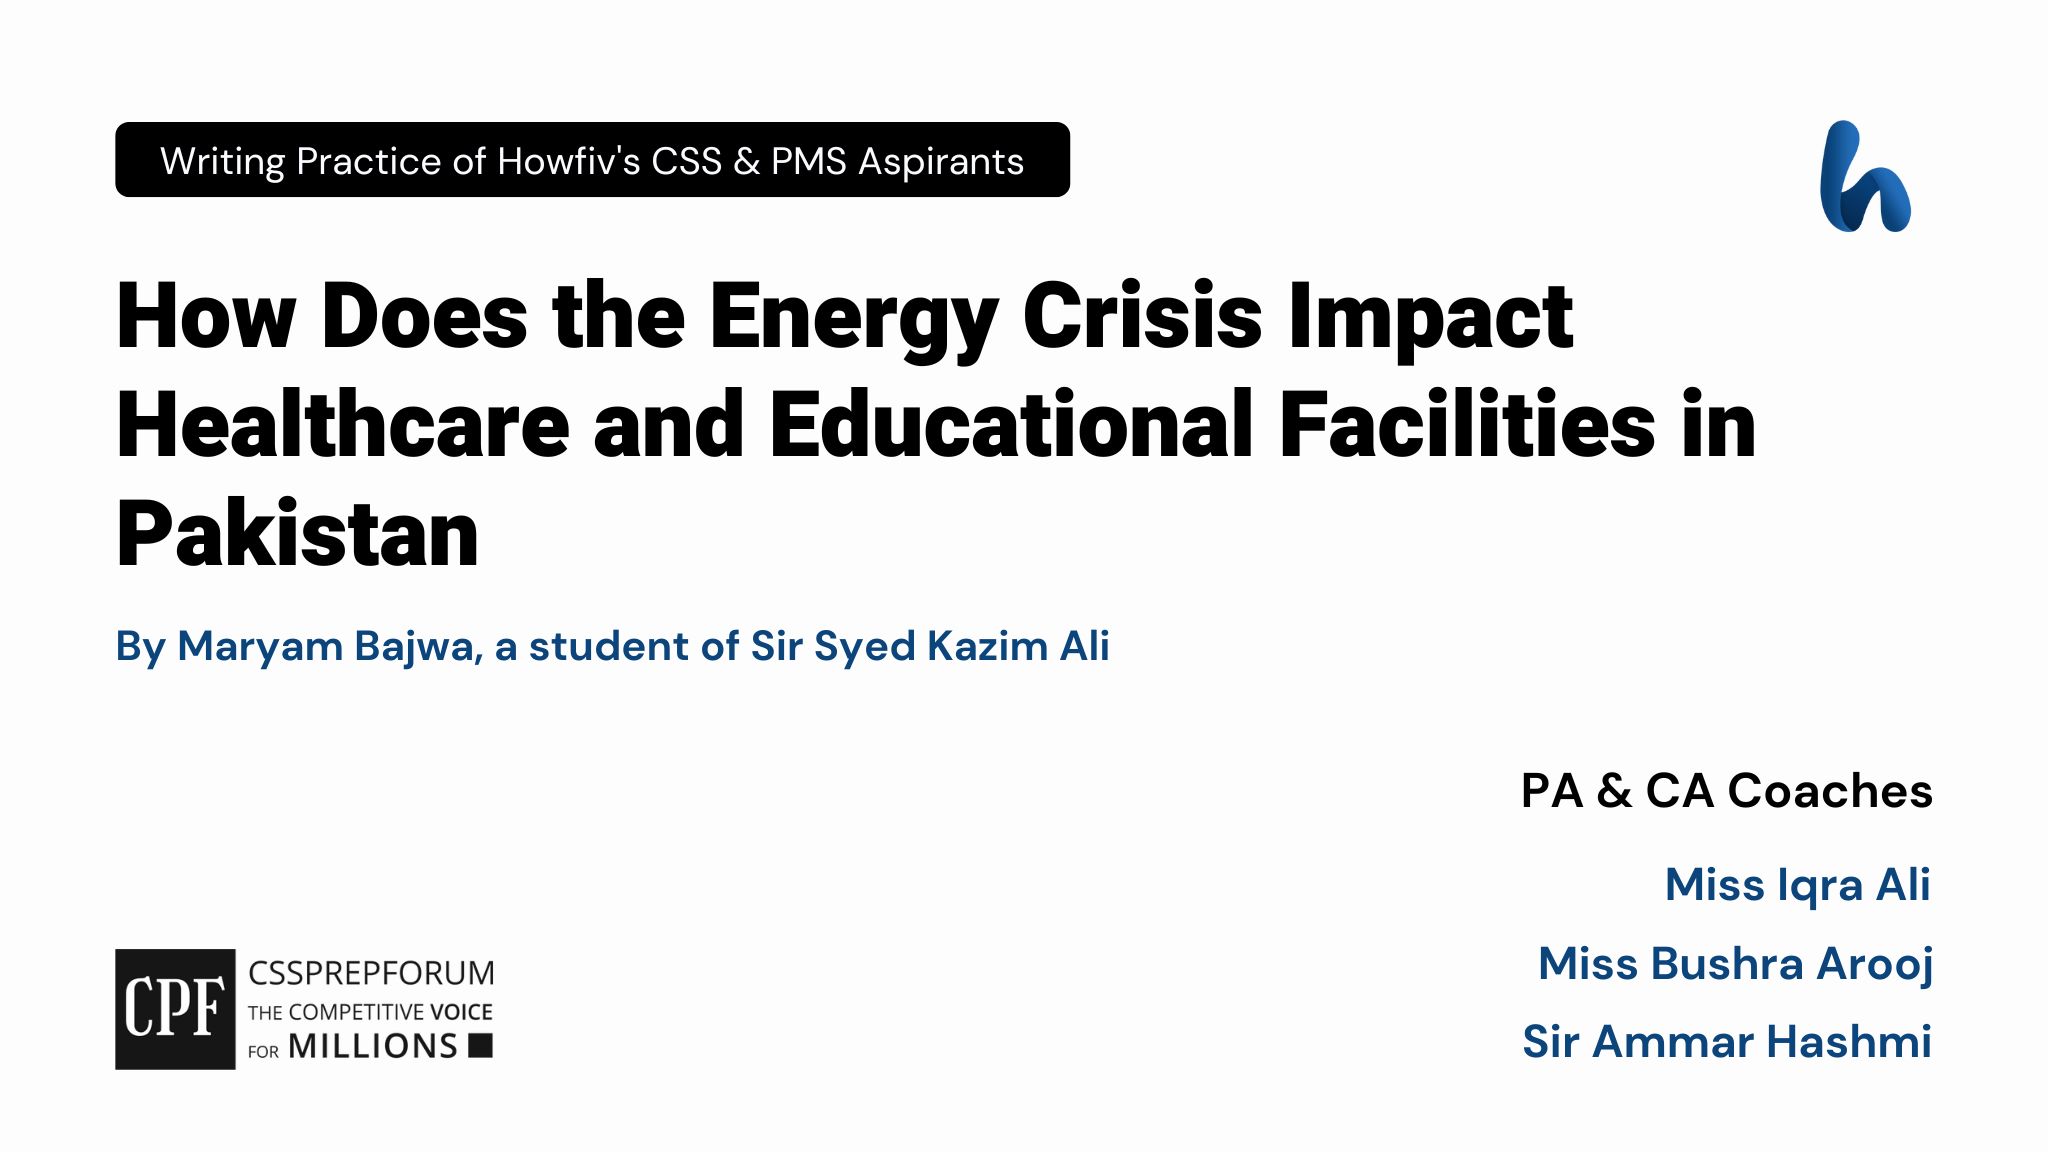 Impacts of Energy Crisis on Facilities in Pakistan